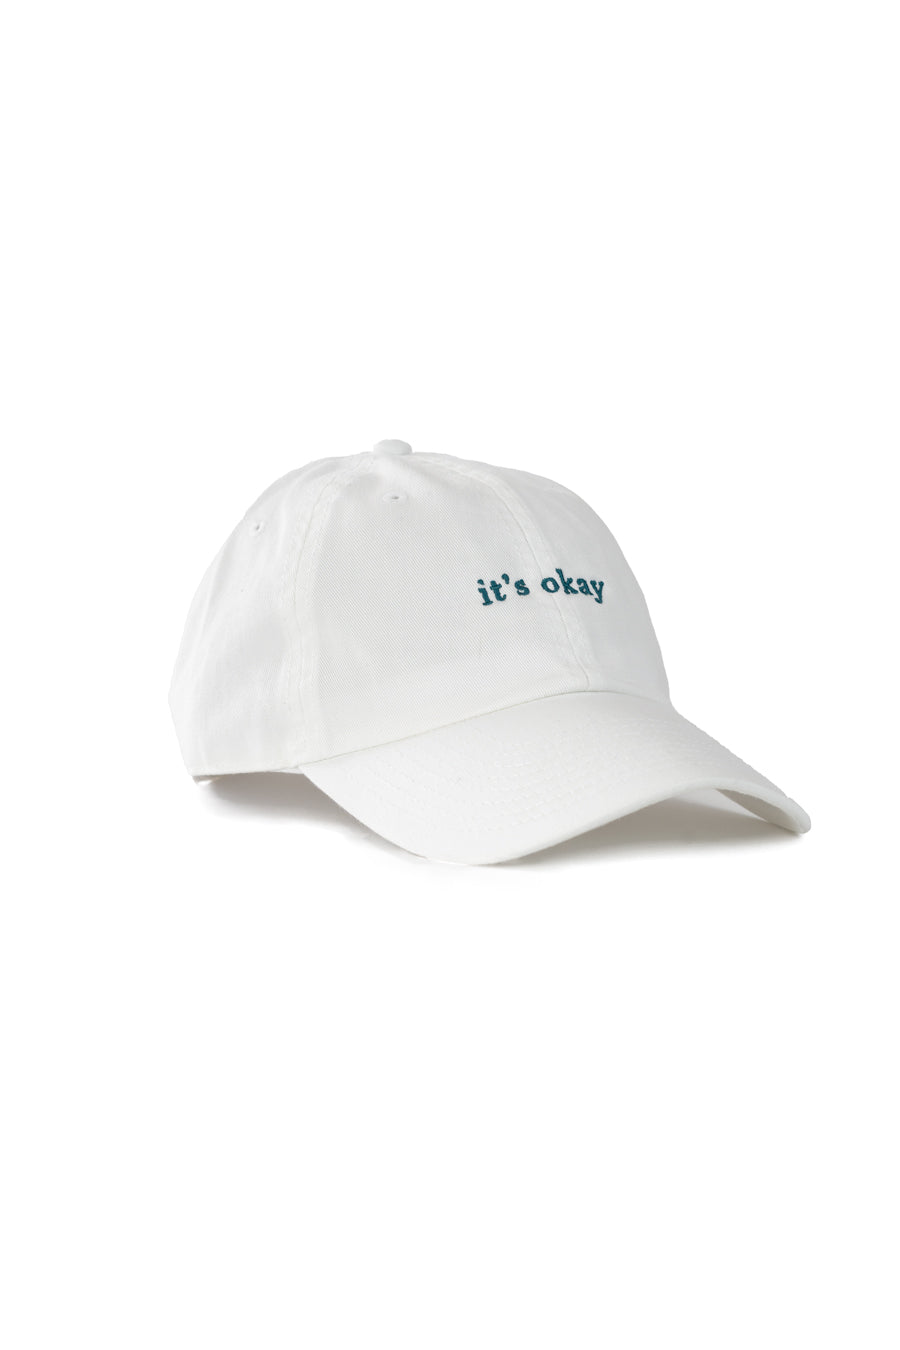 it's okay organic cap white| made with organic cotton, embroidered. This is a studio photography of the cap.